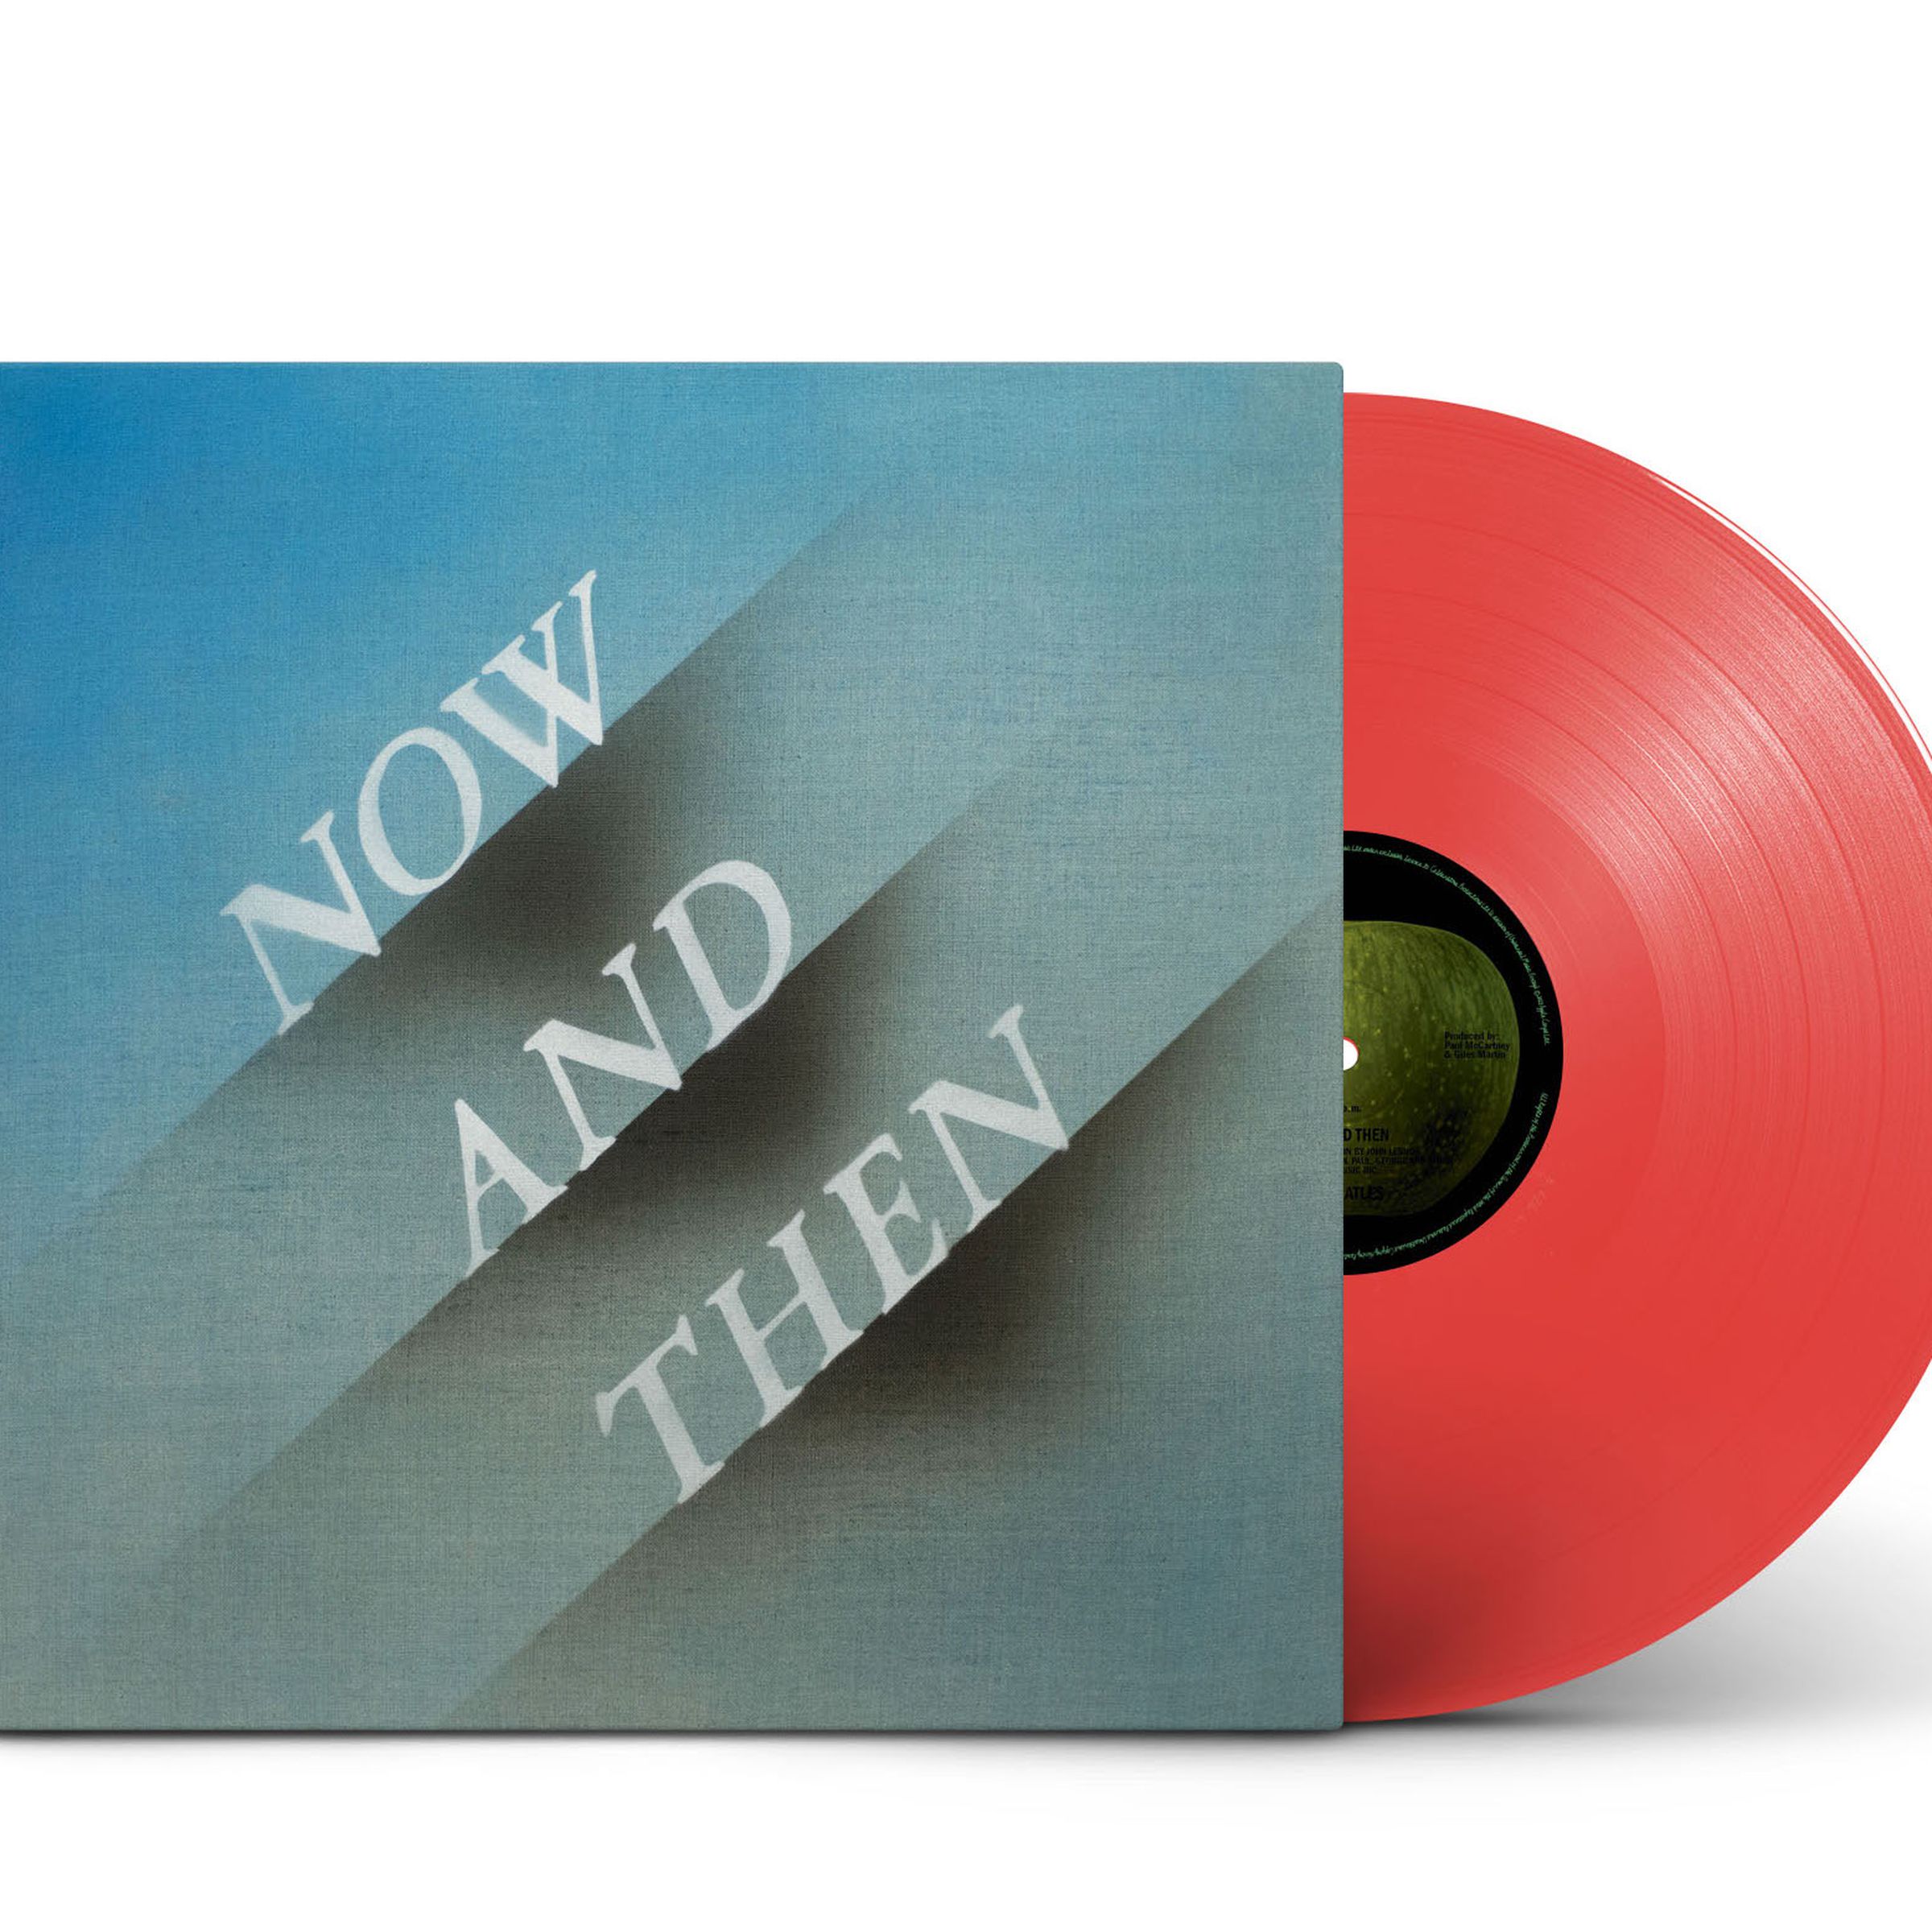 An album cover that reads “Now and Then” along with a red vinyl record with a black center. Both are standing up against a white backdrop.